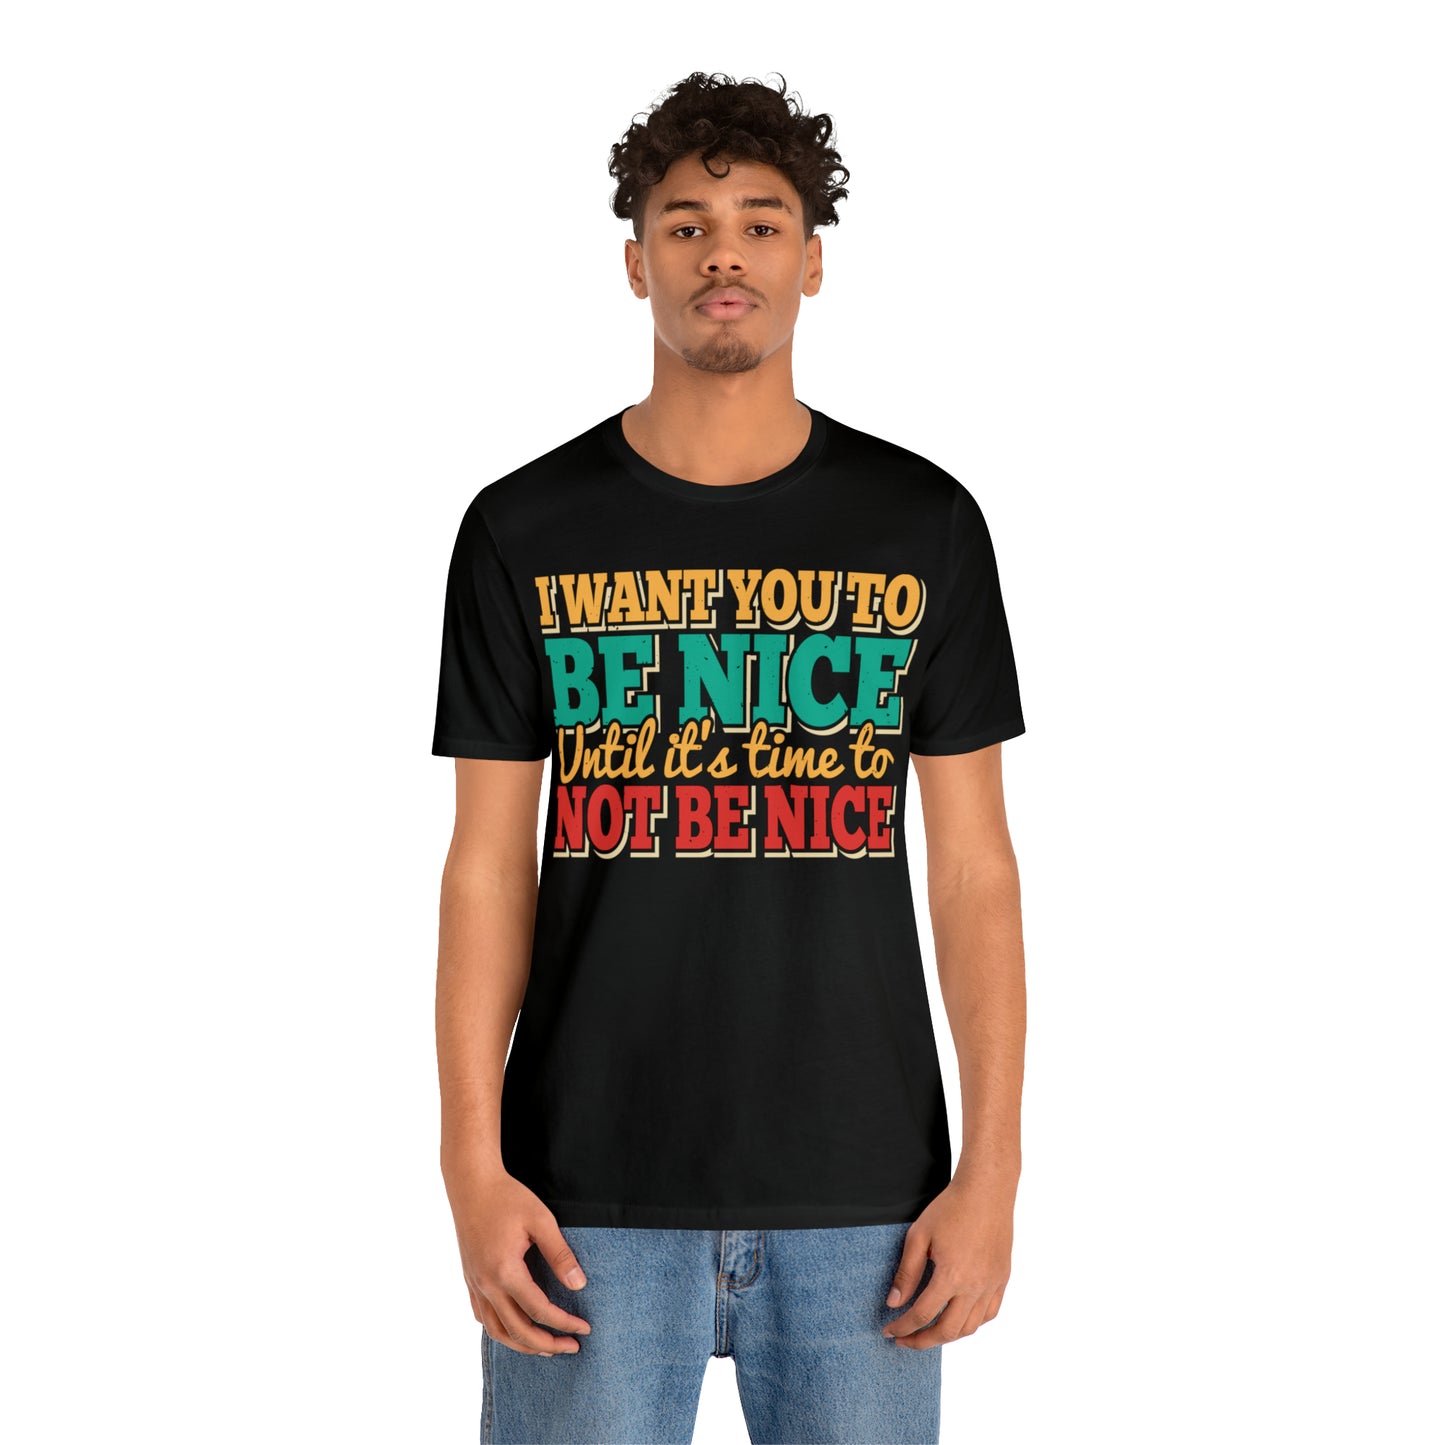 I want you to be nice Tee